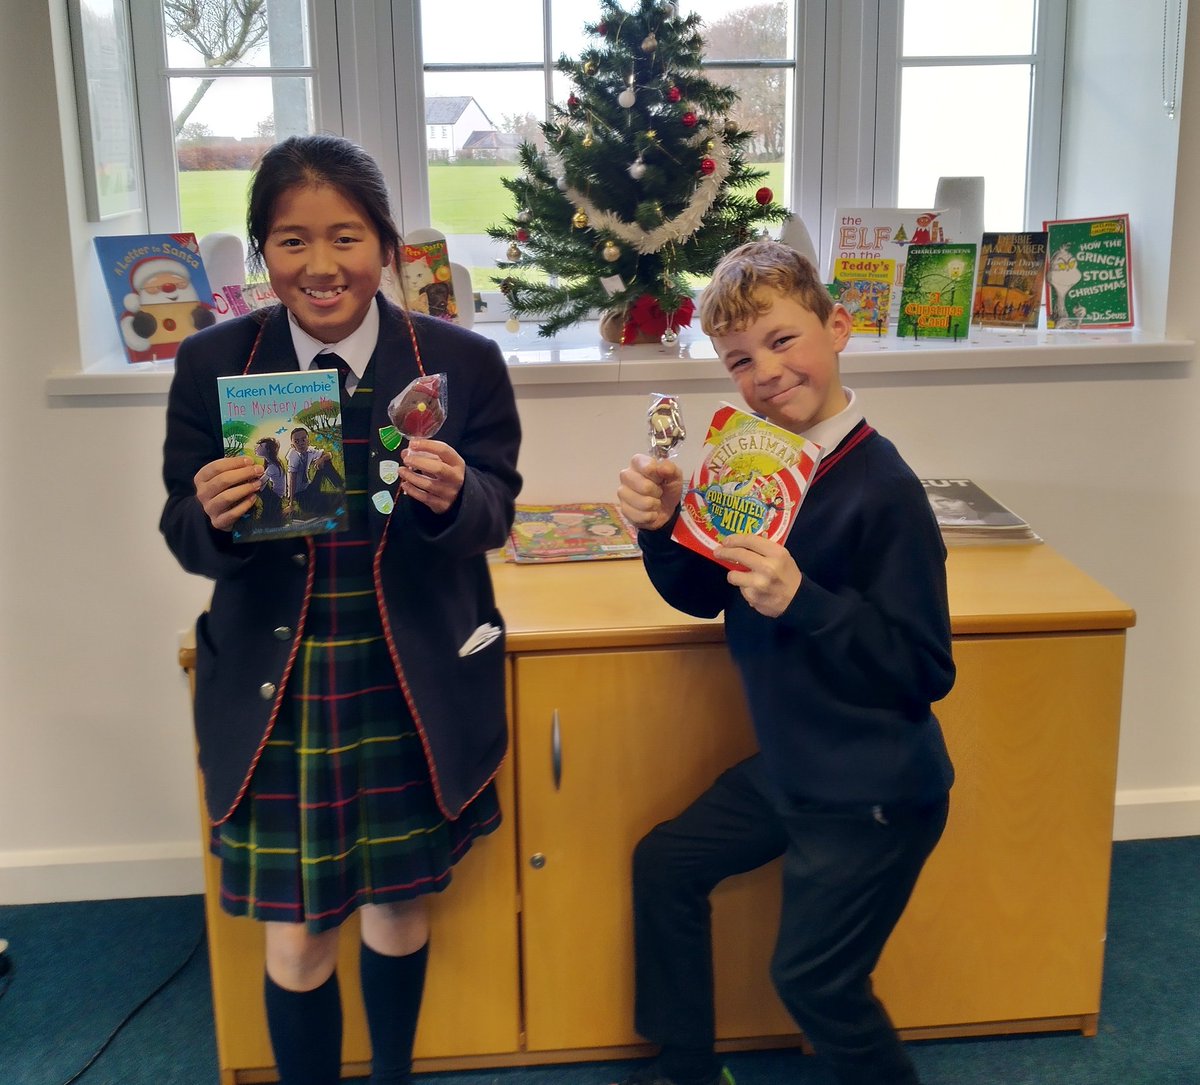 Last term, pupils in Prep 5 to Form 2 took part in our @ReadforGoodUK #readathon, raising funds to buy new books for children's hospitals across Britain. Charlie in Prep 5 holds the record, #reading an impressive 10 #books in 5 weeks! 📚 

#lovebooks #shebbearlibrary #readforgood